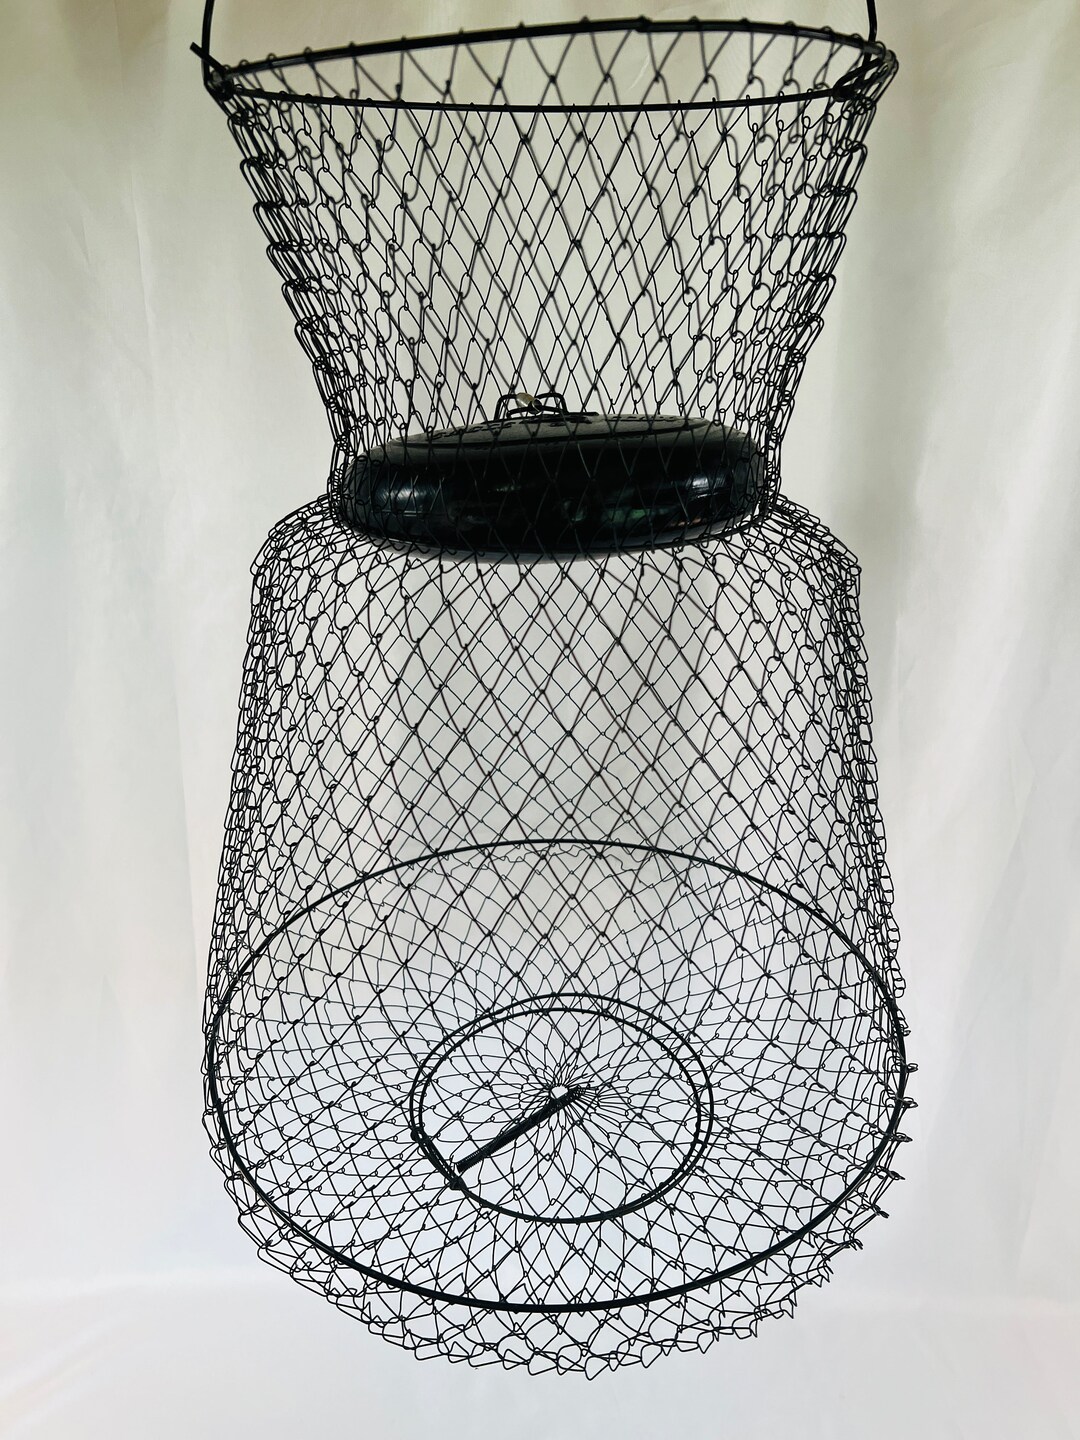 Eagle Claw Floating Wire Mesh Collapsible Fish Basket, Fish